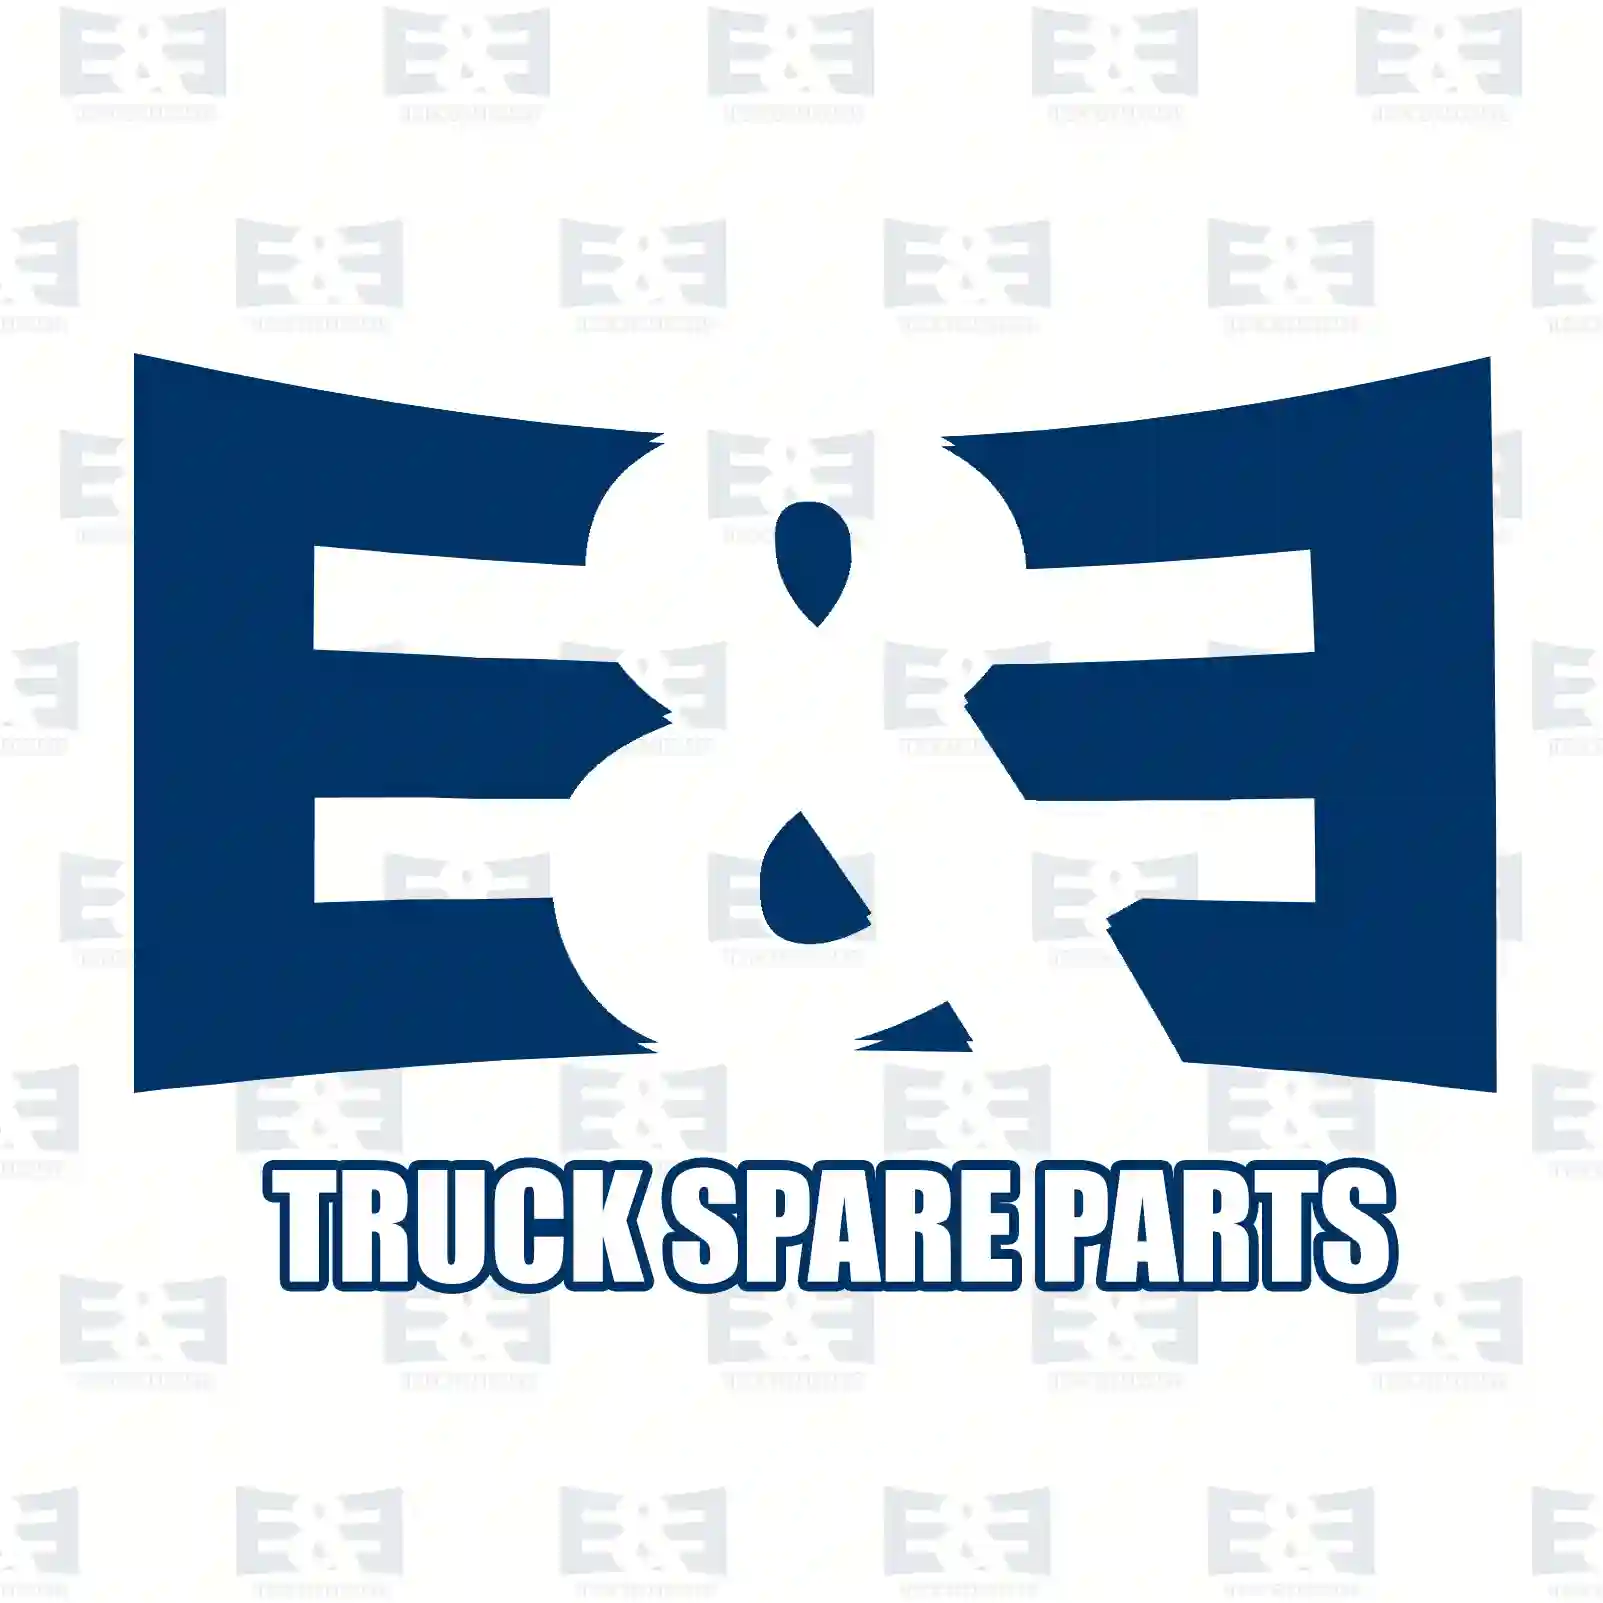  Cabin tilt cylinder, patented accident protection || E&E Truck Spare Parts | Truck Spare Parts, Auotomotive Spare Parts